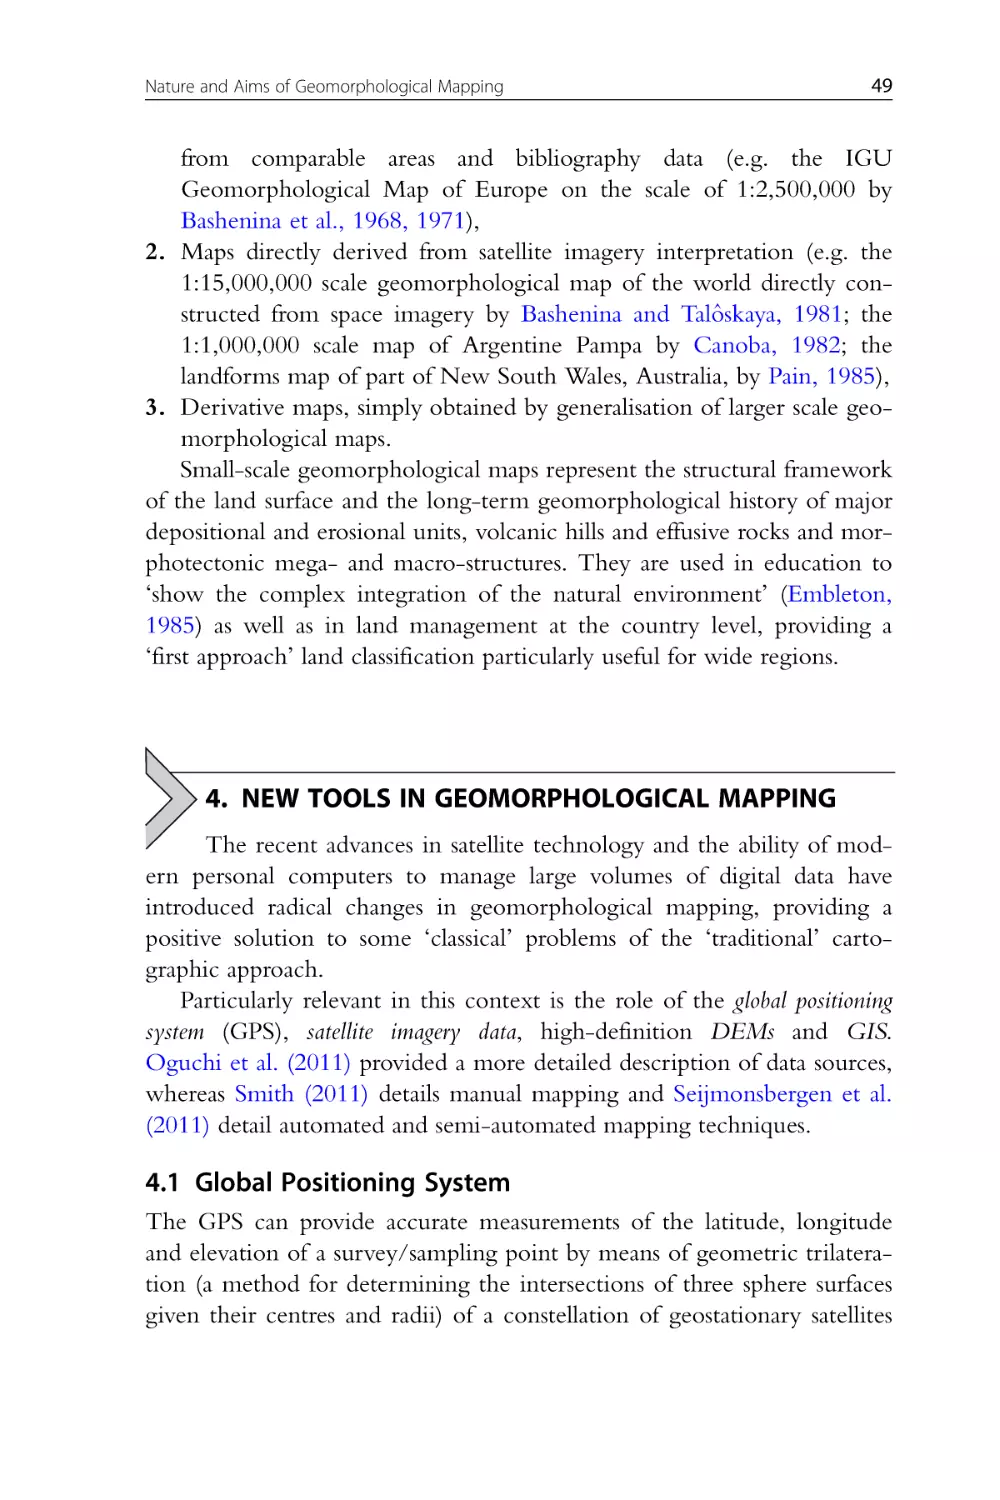 4. New Tools in Geomorphological Mapping
4.1 Global Positioning System